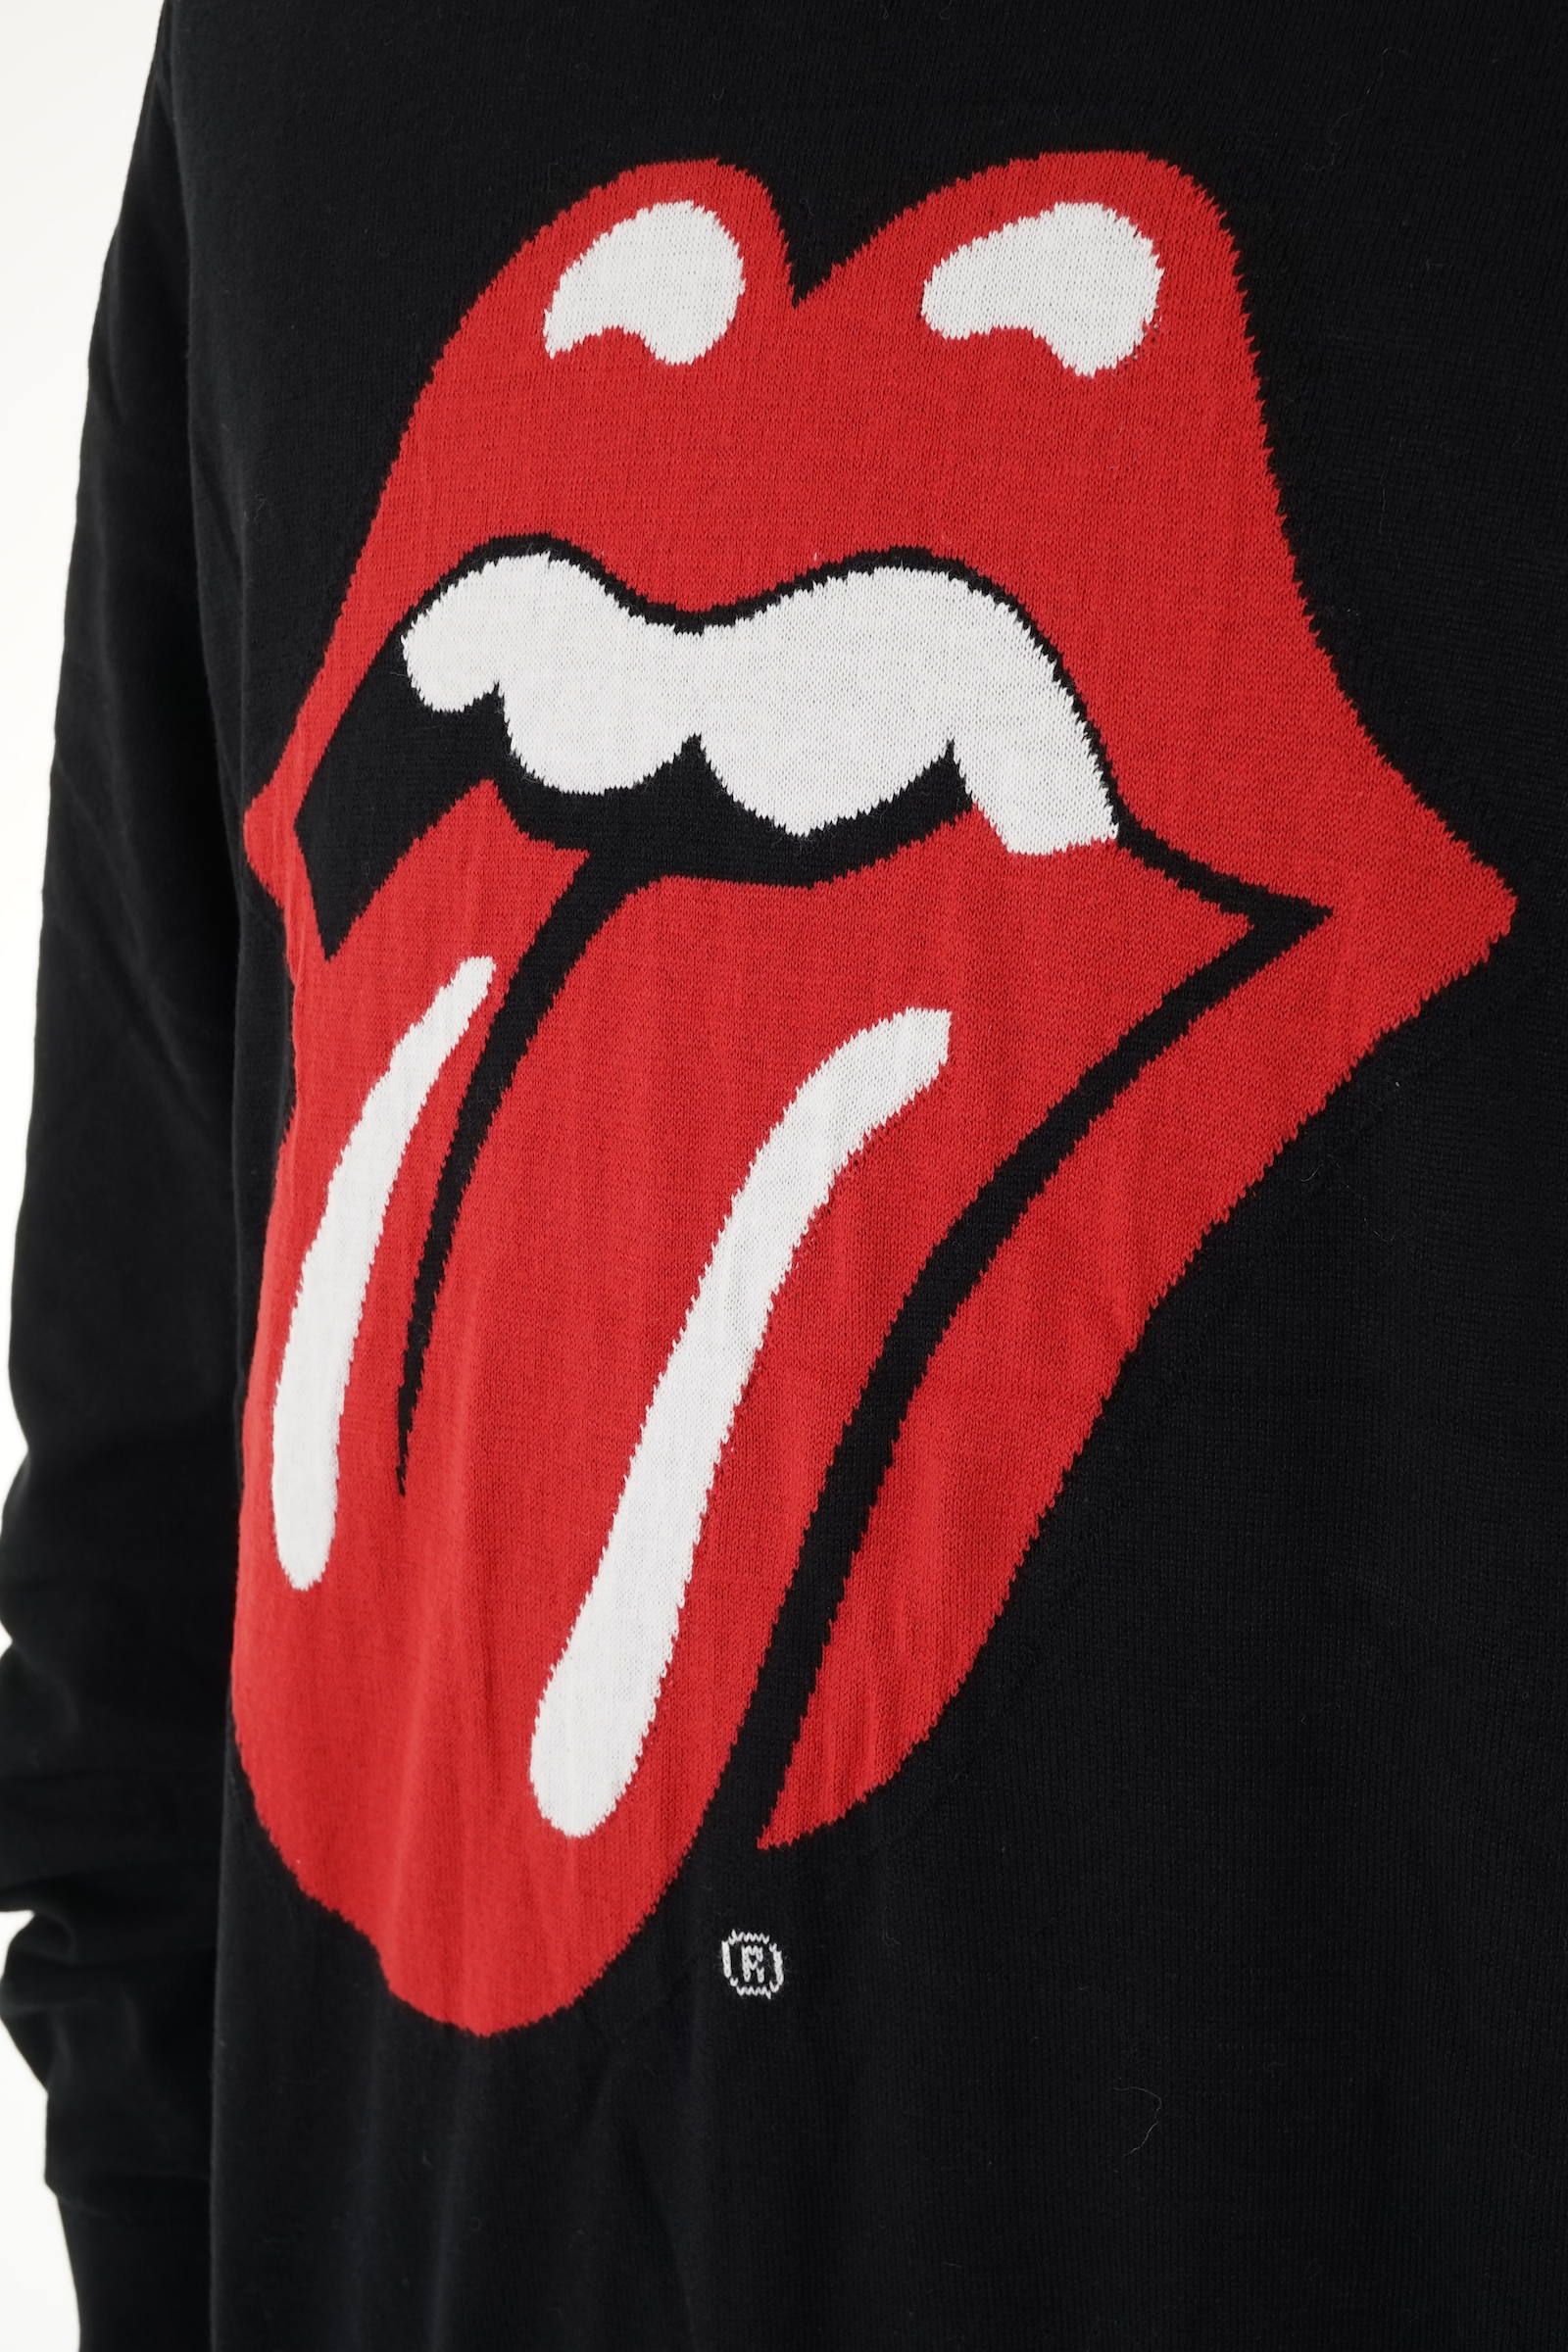 Marbles - THE ROLLING STONES × MARBLES INTARSIA KNIT / ローリング